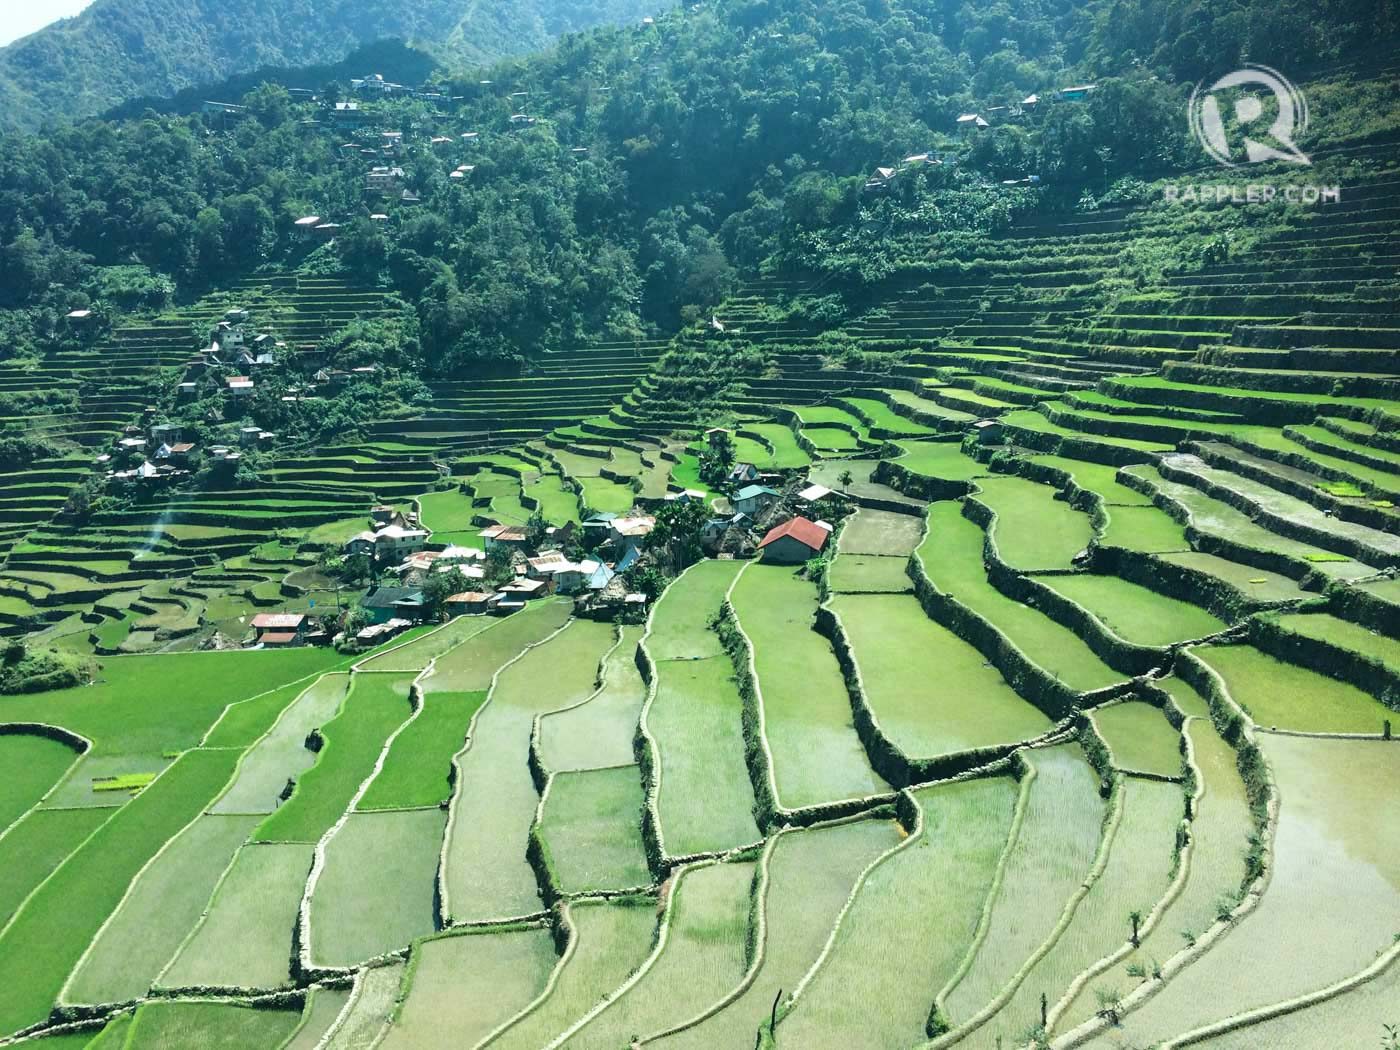 BATAD. There are currently 1,600 hectares of cultivated rice terraces in the municipality of Banaue, the most popular of which are the Batad rice terraces. Photo by Lian Buan/Rappler 